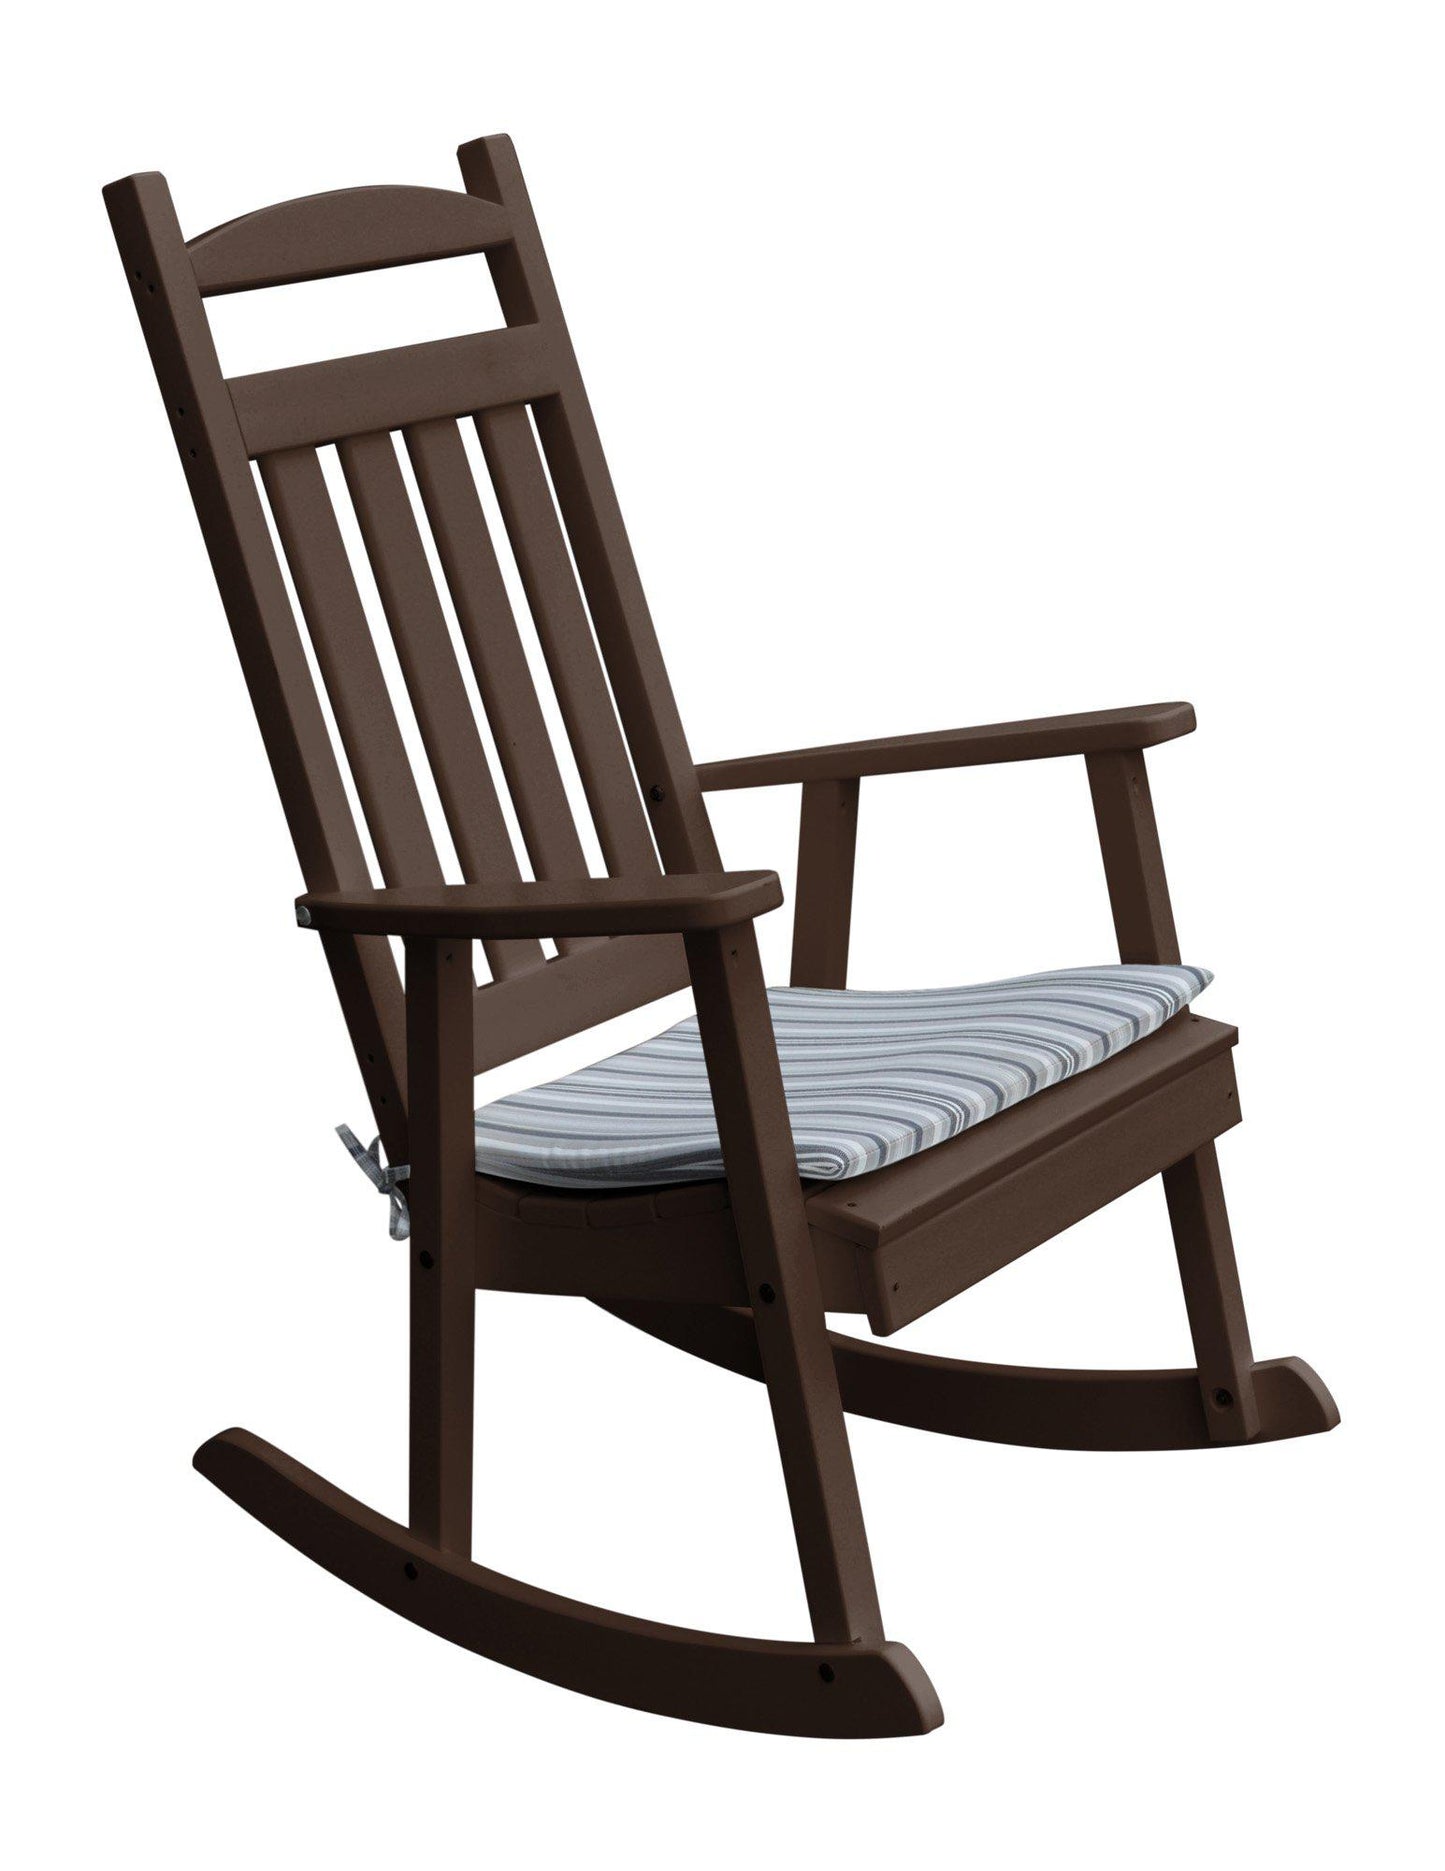 classic recycled plastic porch rocking chair tudor brown with rocker seat cushion